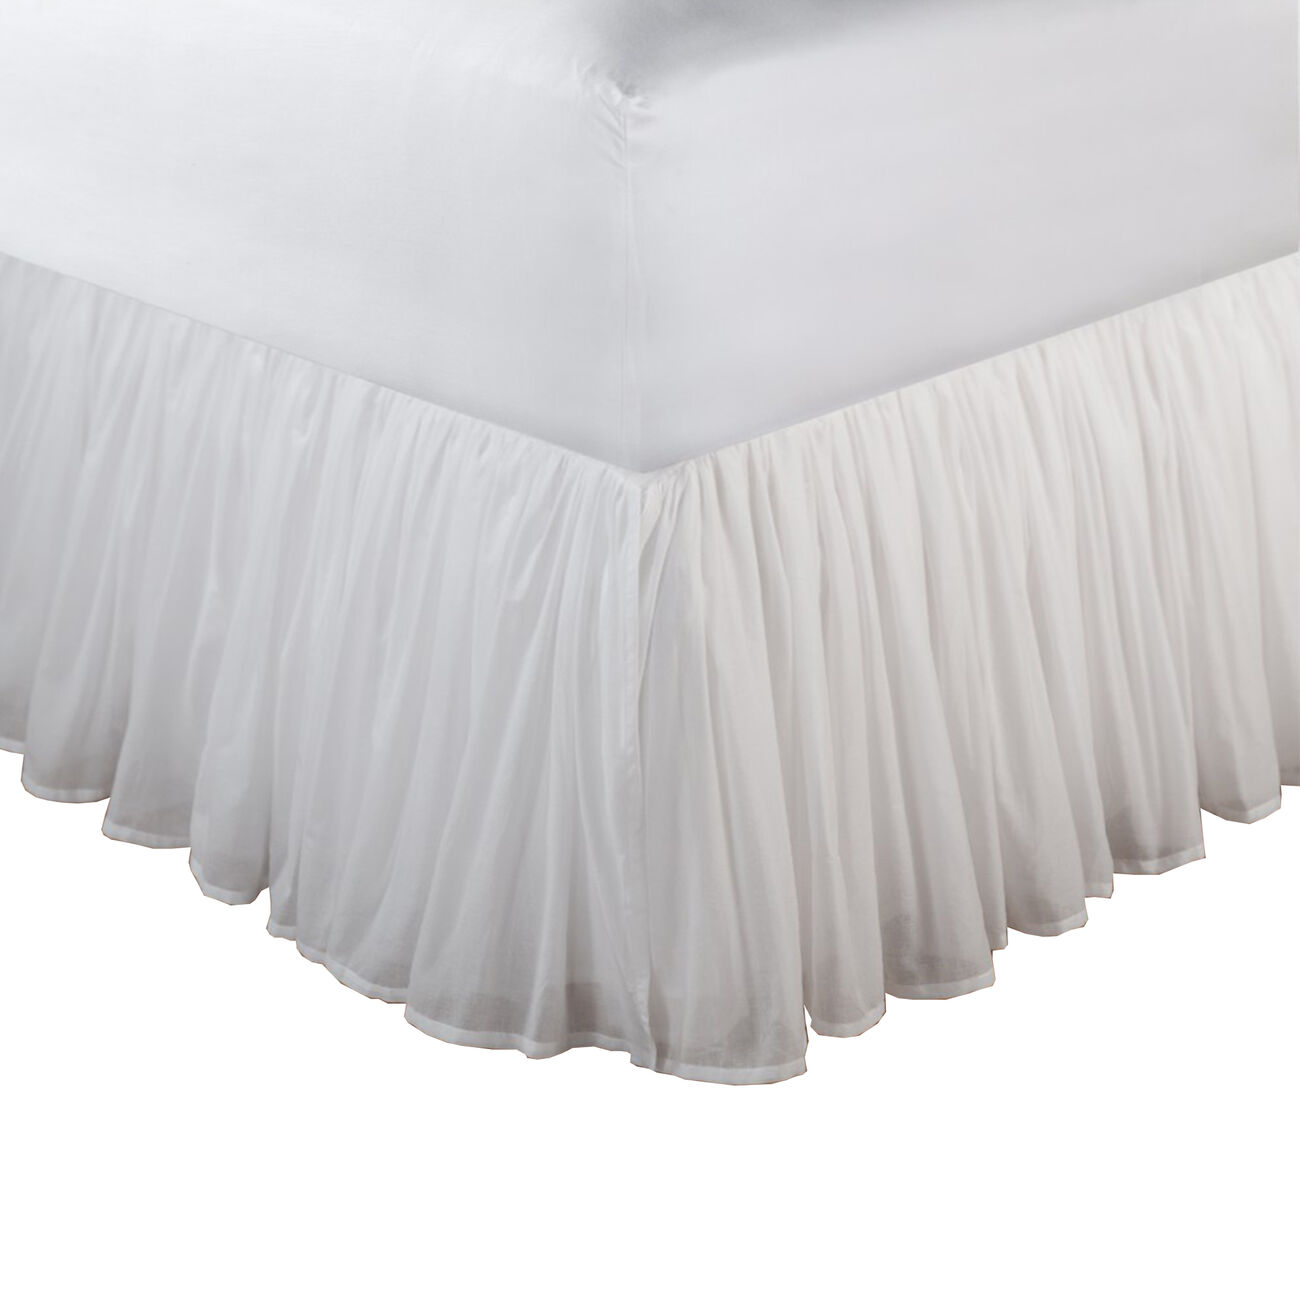 Liard Fabric Queen Size Bed Skirt with Ruffle Stitching and Split Corners, White